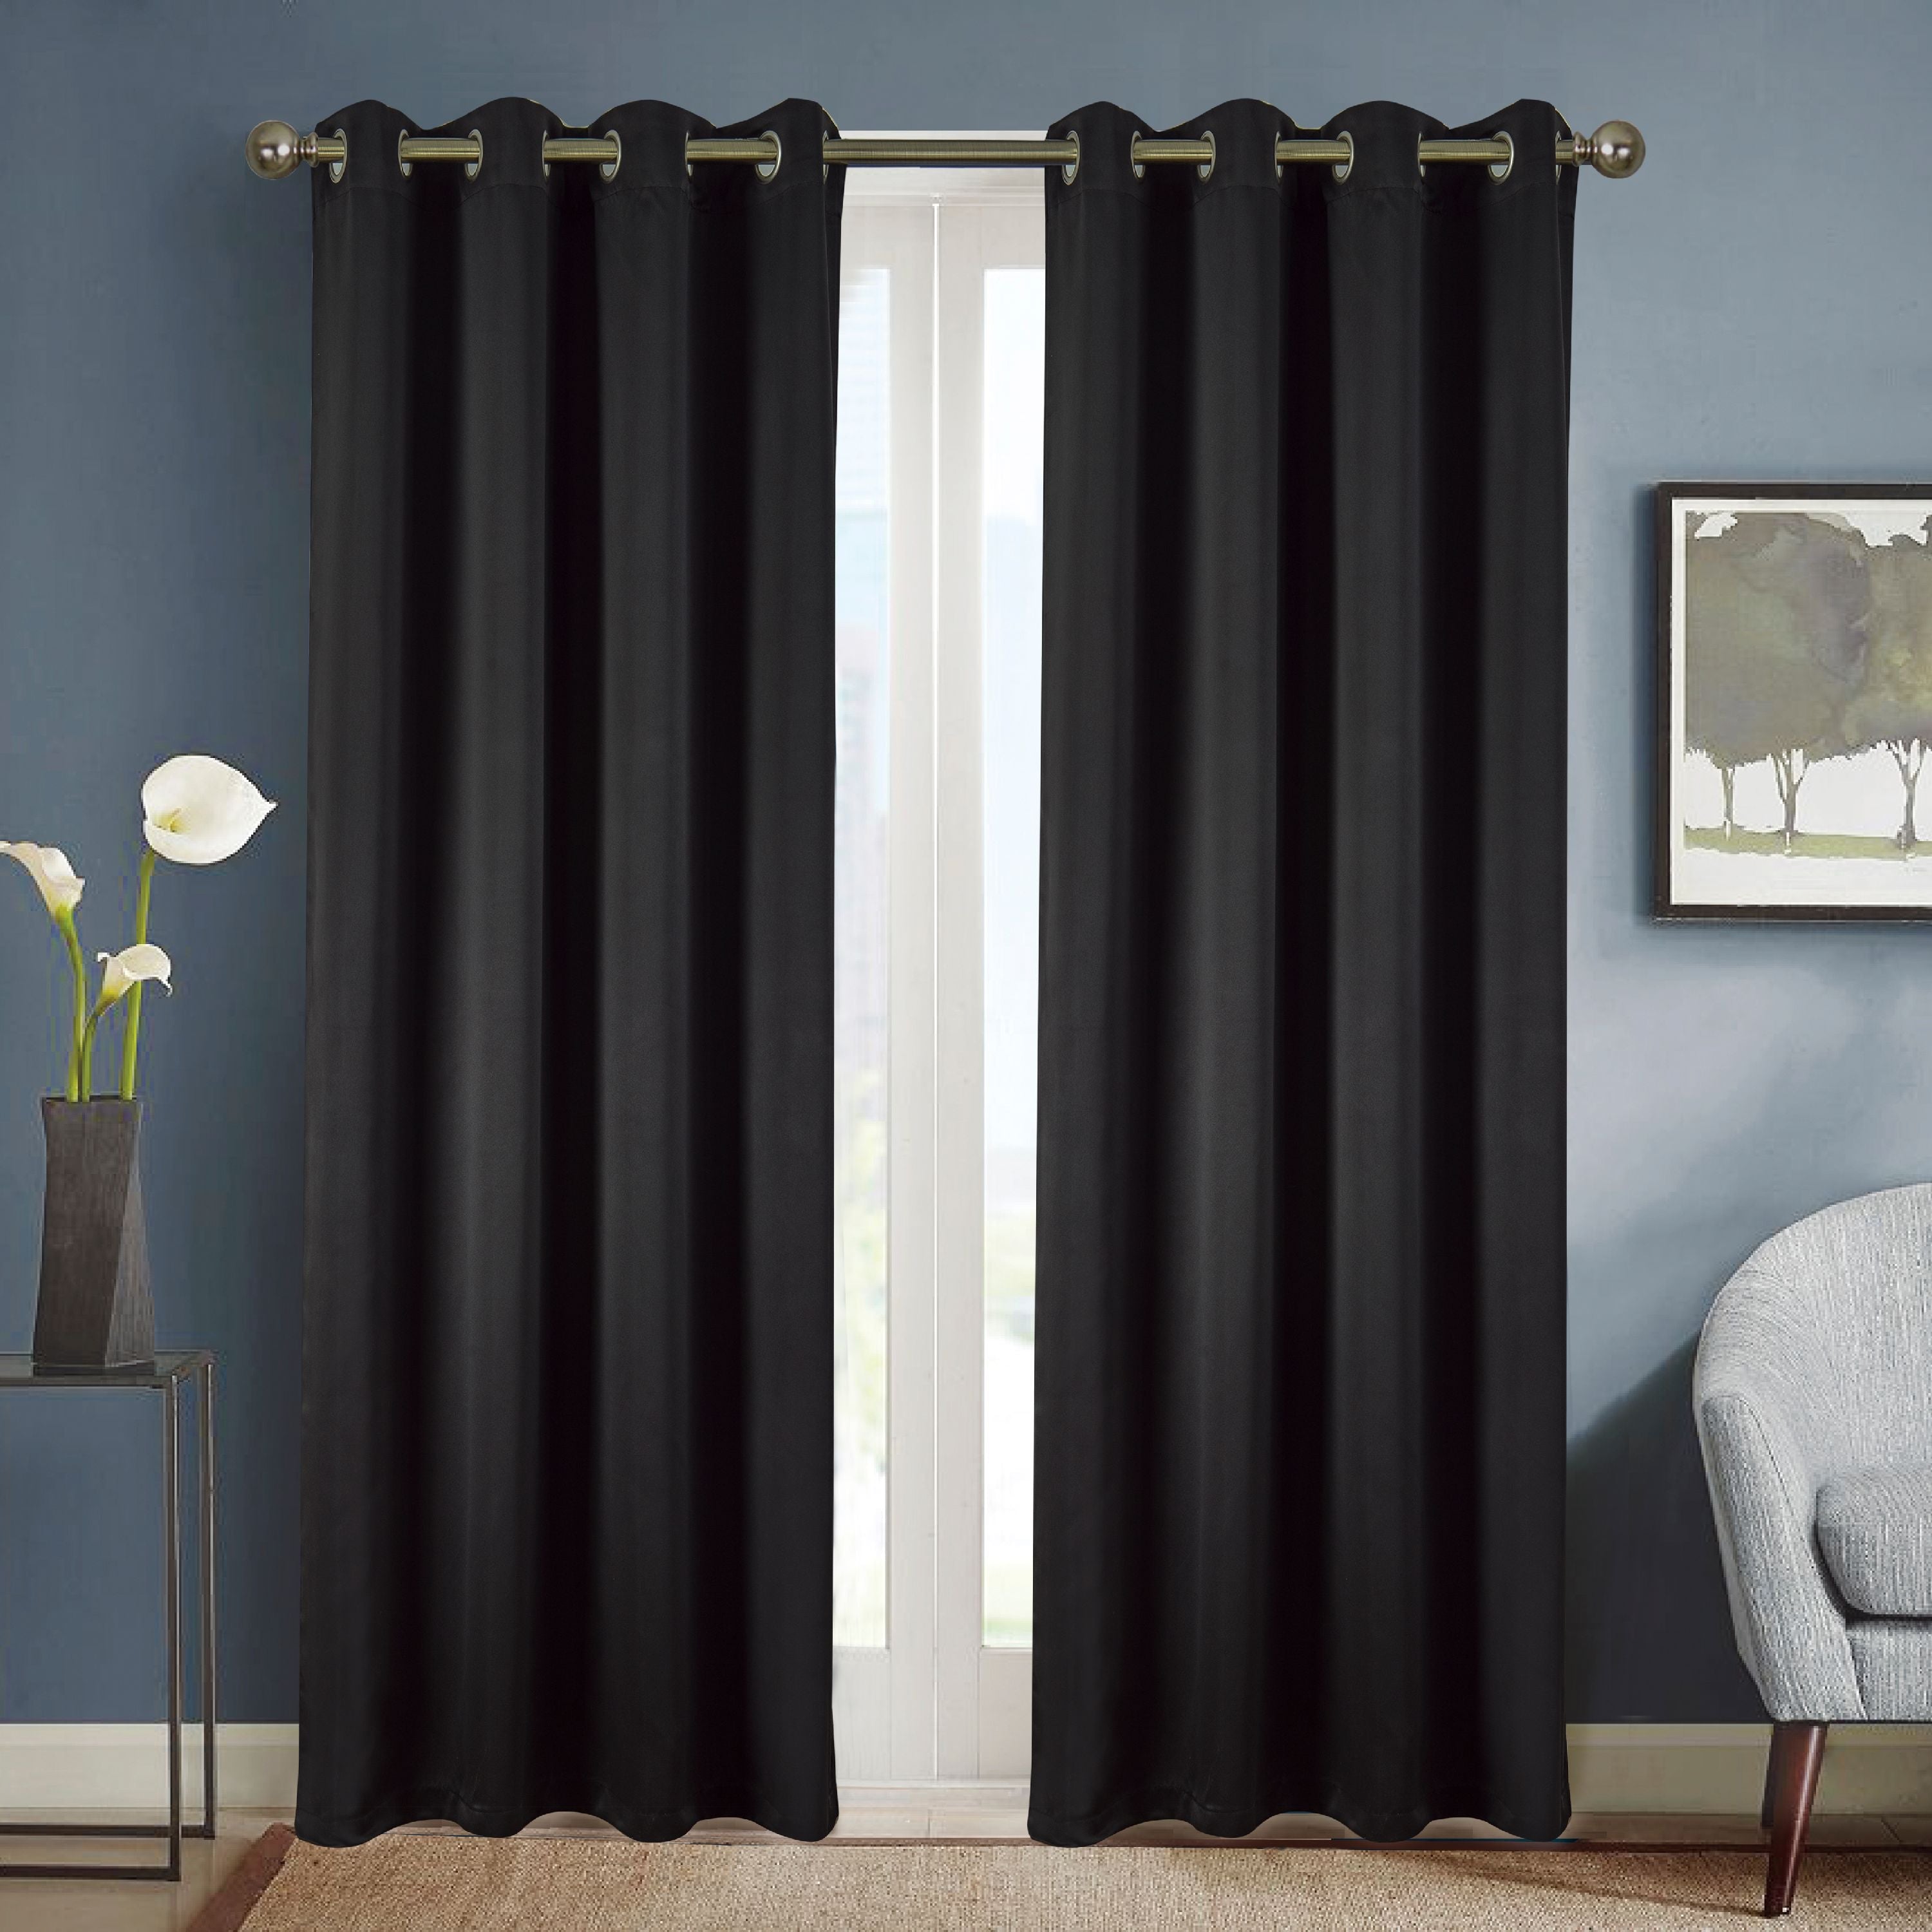 Anchorage Solid Blackout 54 x 63 in. Grommet Single Curtain Panel by Olivia Gray - Linen Universe Co.